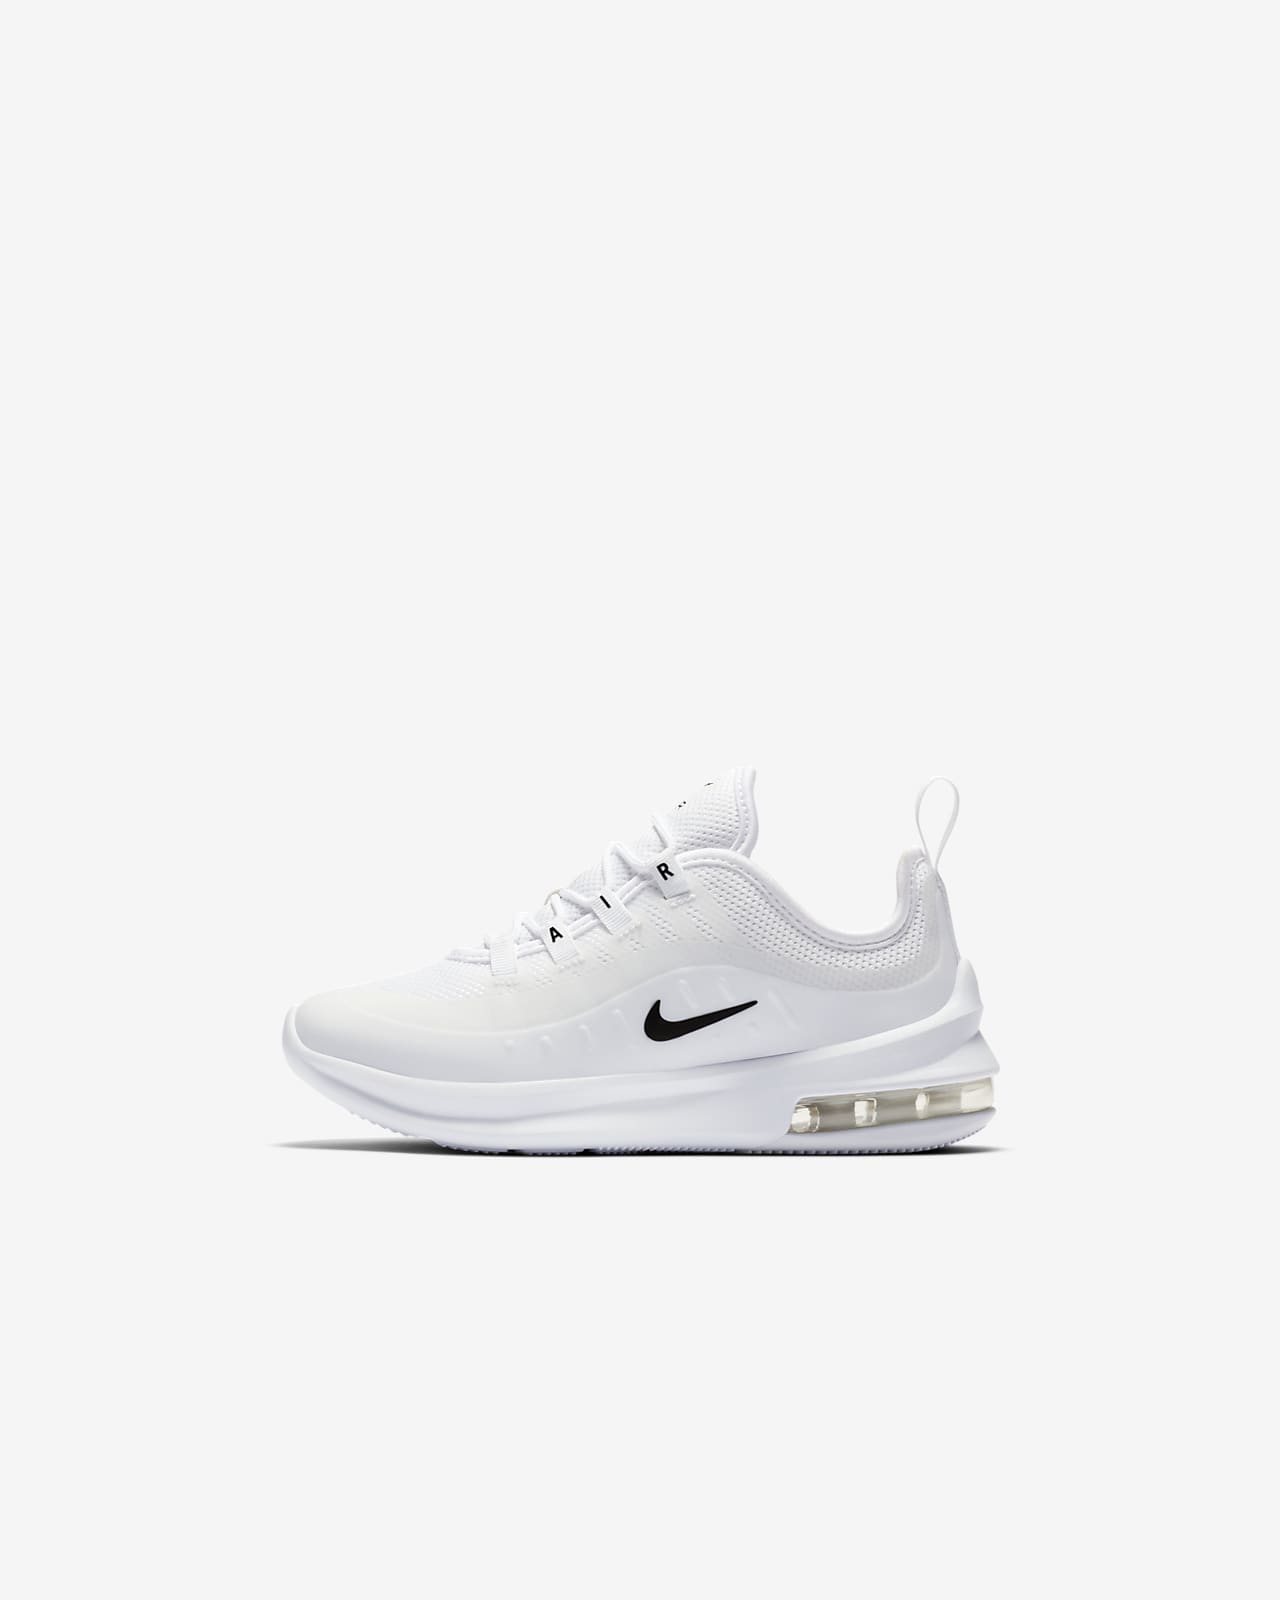 Special faint Answer the phone Nike Air Max Axis Younger Kids' Shoe. Nike SA